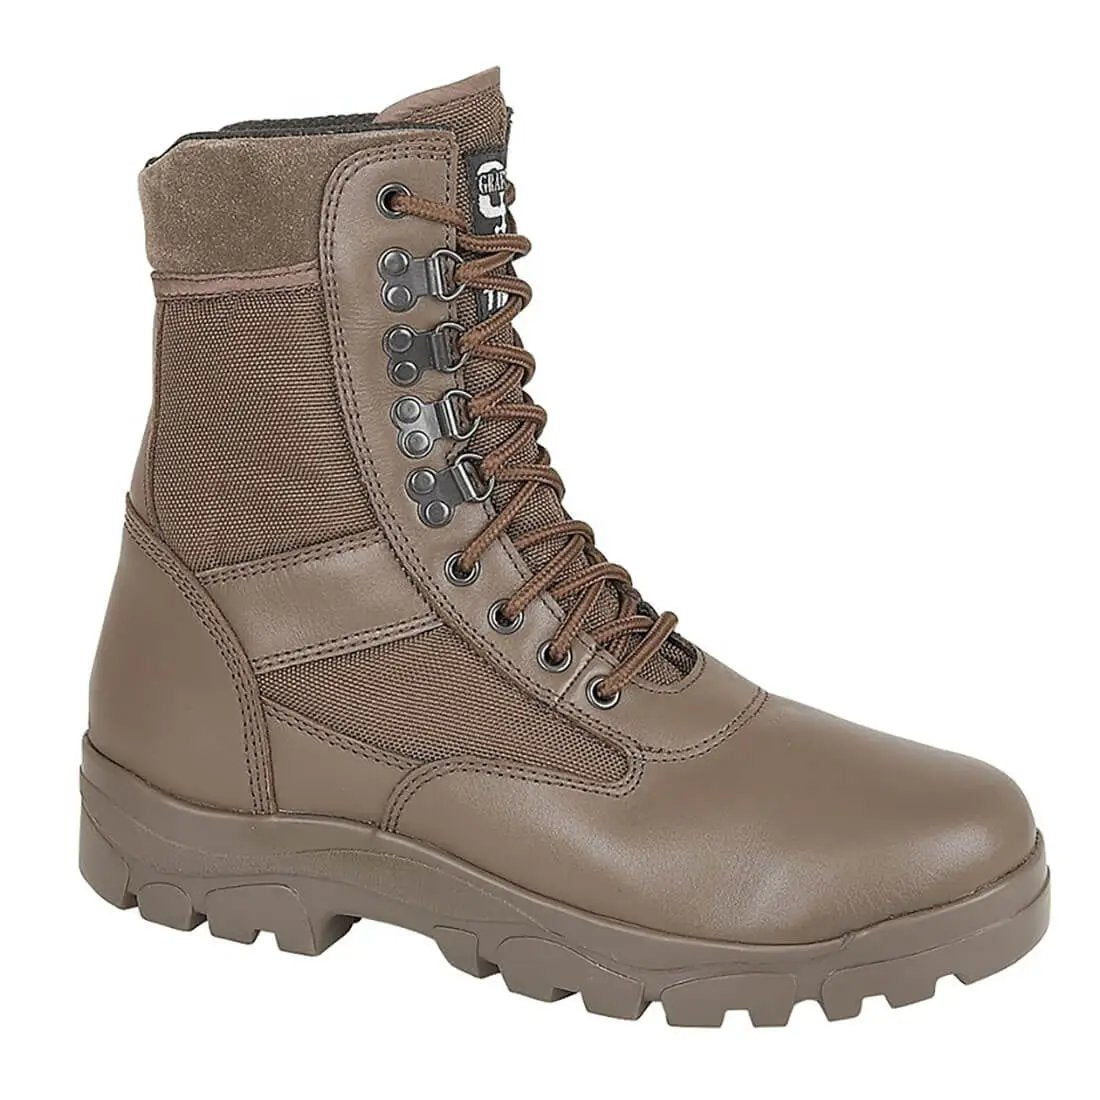 Grafters G-Force Unisex MoD Brown Combat Boot - John Bull Clothing